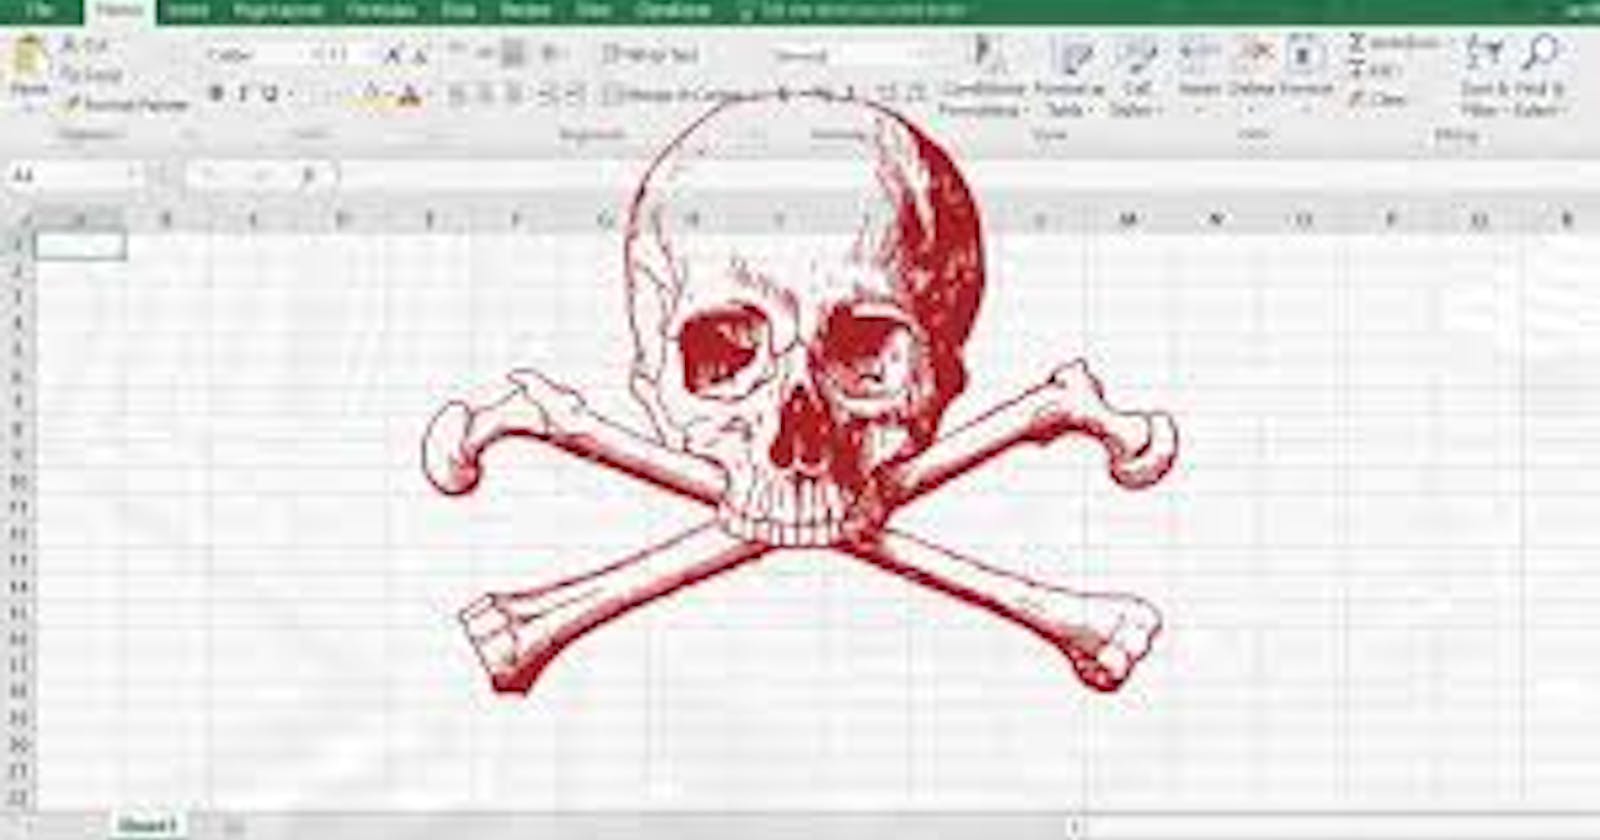 Excel Macros Unleashed: The Hidden Malware Threat